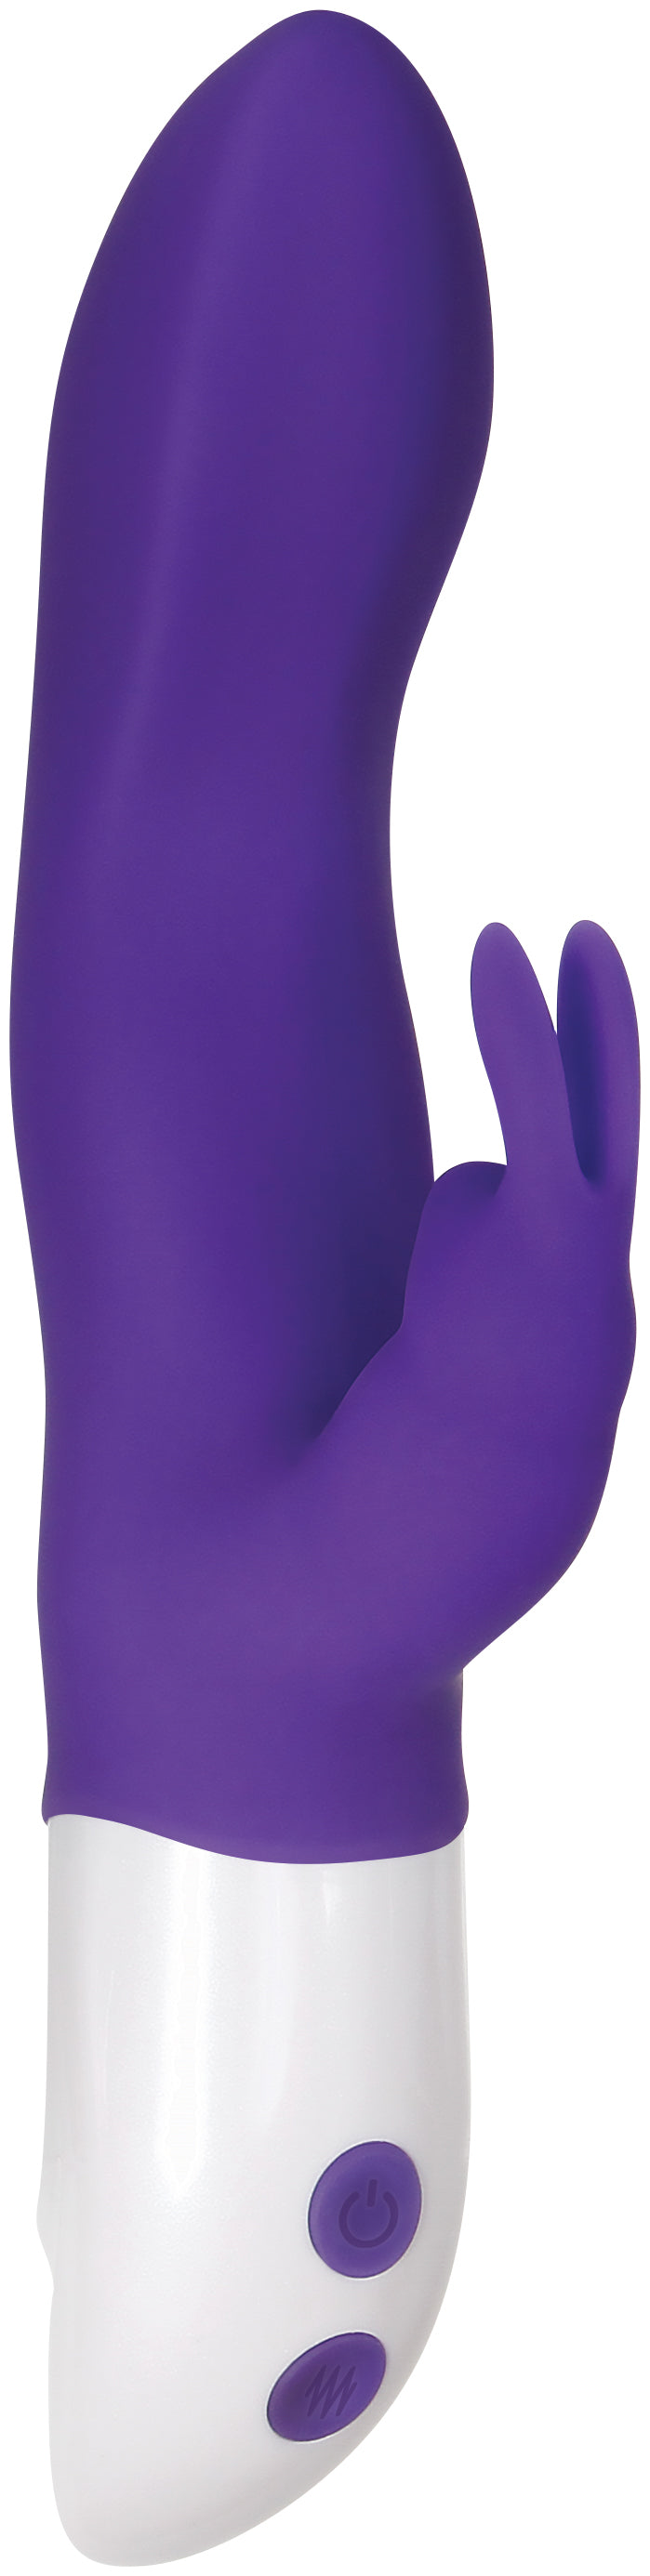 Eve's Big Love Rechargeable Rabbit AE-BL-5842-2